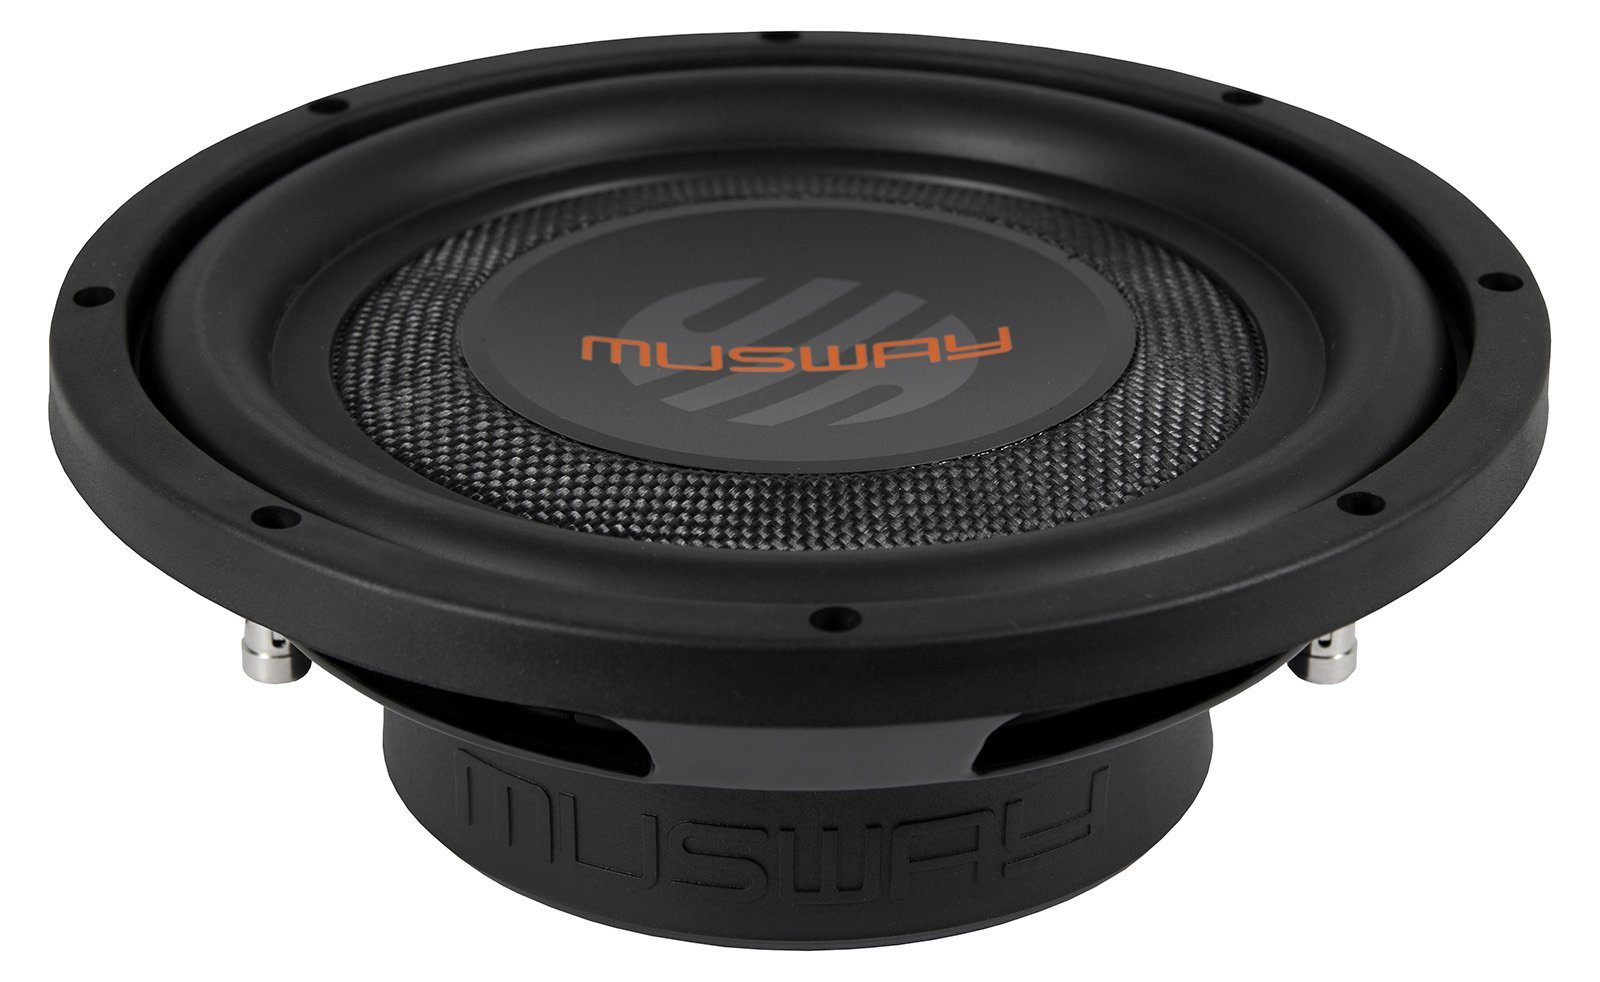 Musway MWS1022 10? FLAT Subwoofer 10? (25 cm) FLACH Subwoofer Auto-Subwoofer (Musway MWS1022, 10“ FLAT Subwoofer 10“ (25 cm) FLACH Subwoofer)